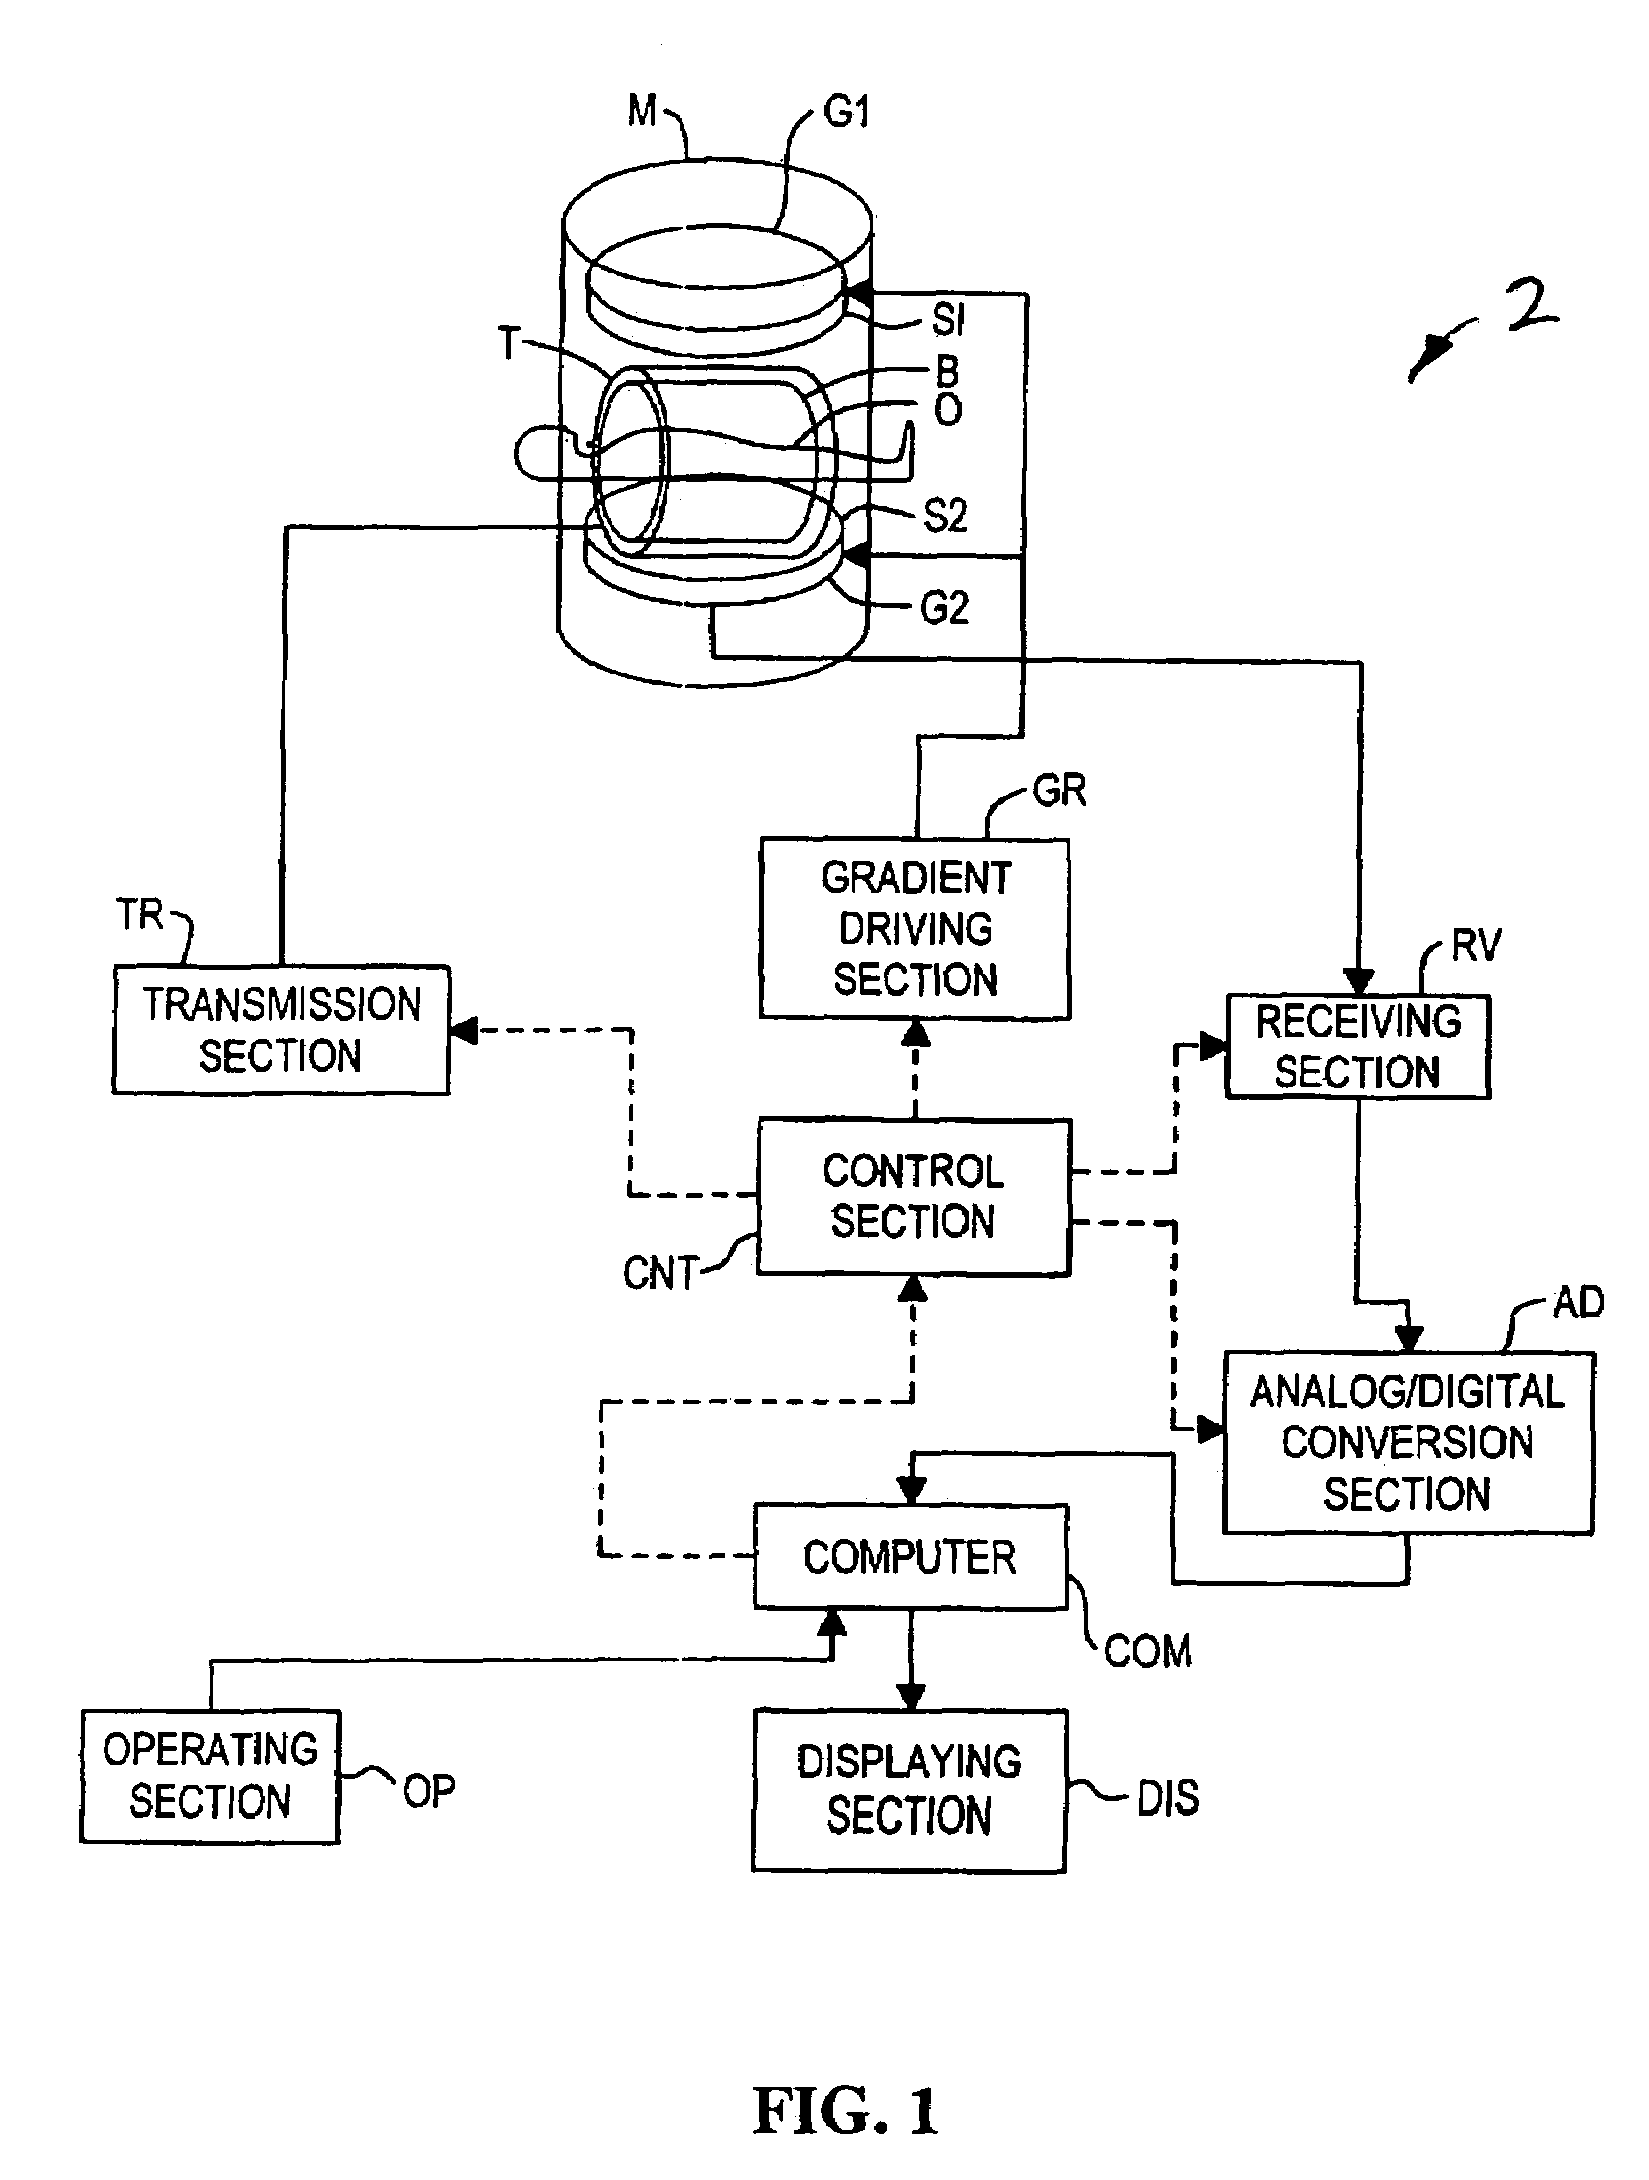 System and method for operating transmit or transmit/receive elements in an MR system